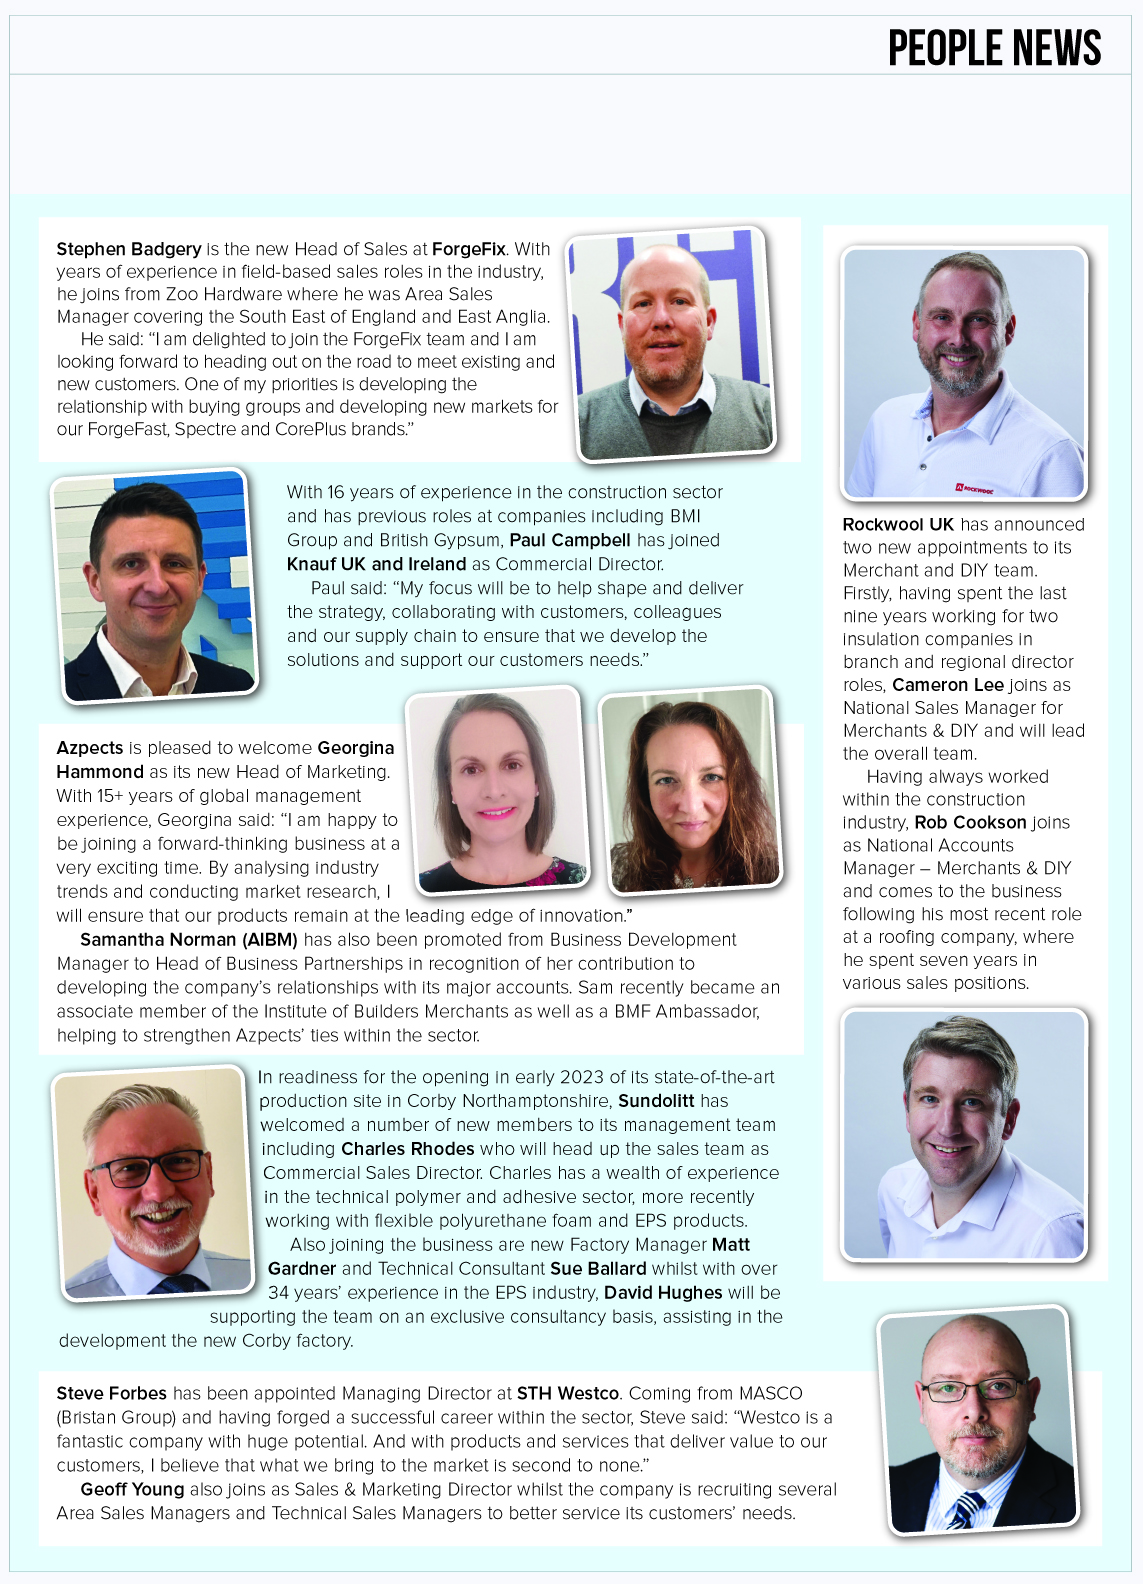 As featured in the January 2023 edition of the magazine, PBM presents a round-up of some of the latest industry appointments and job moves: